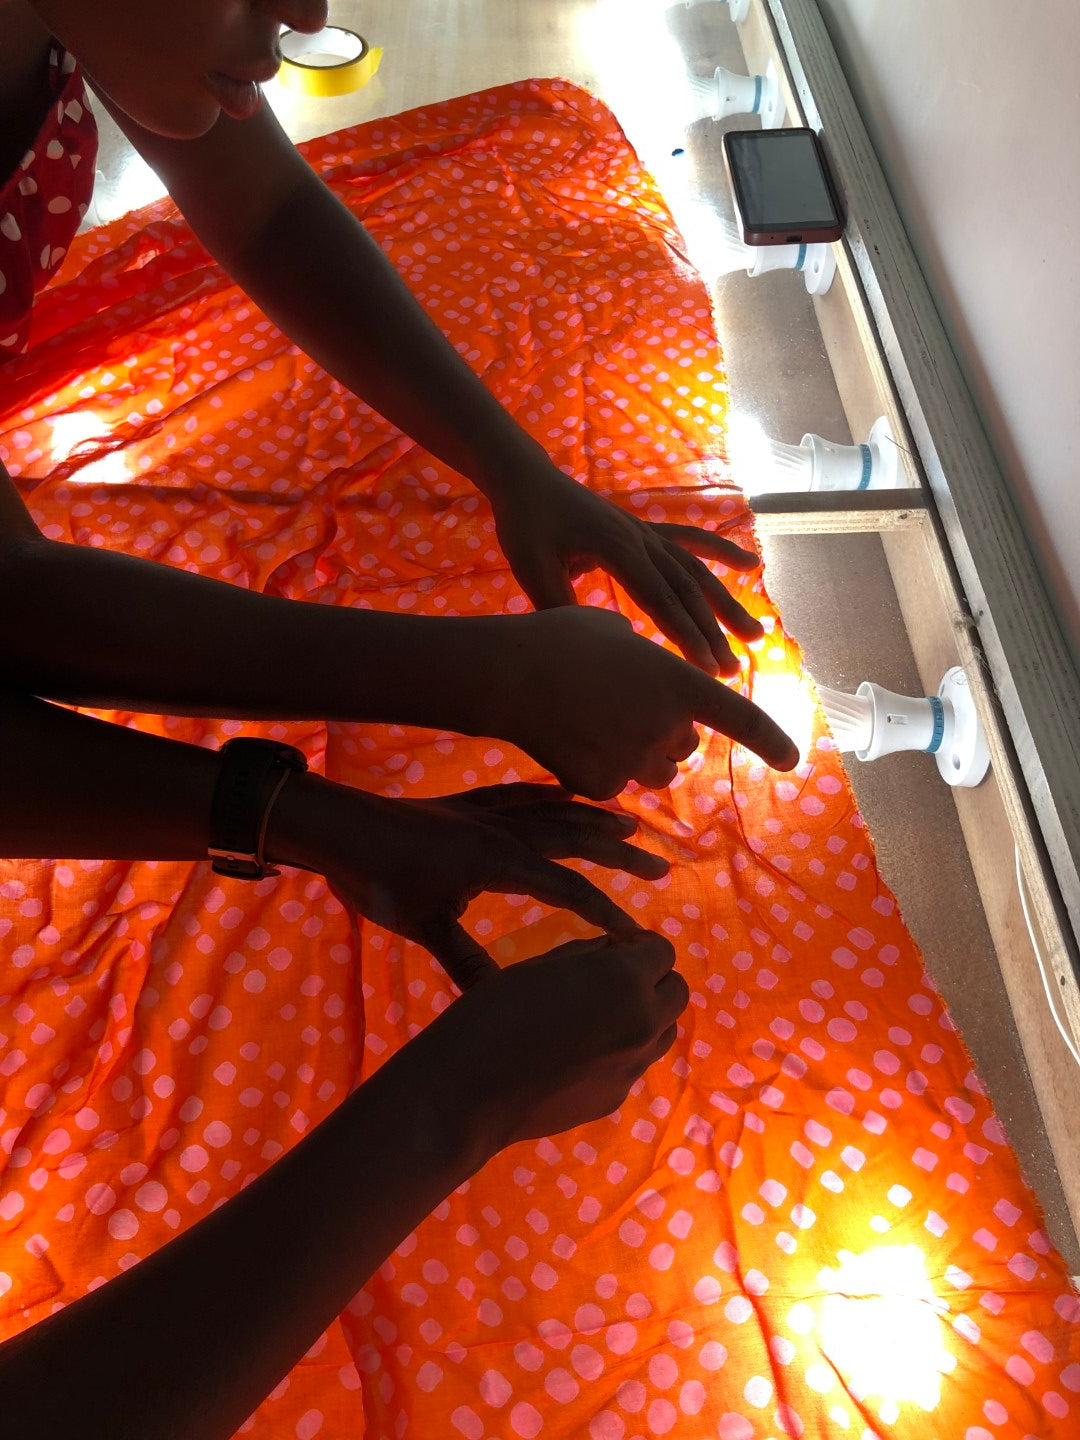 Two people checking orange fabric for damage on a light table.